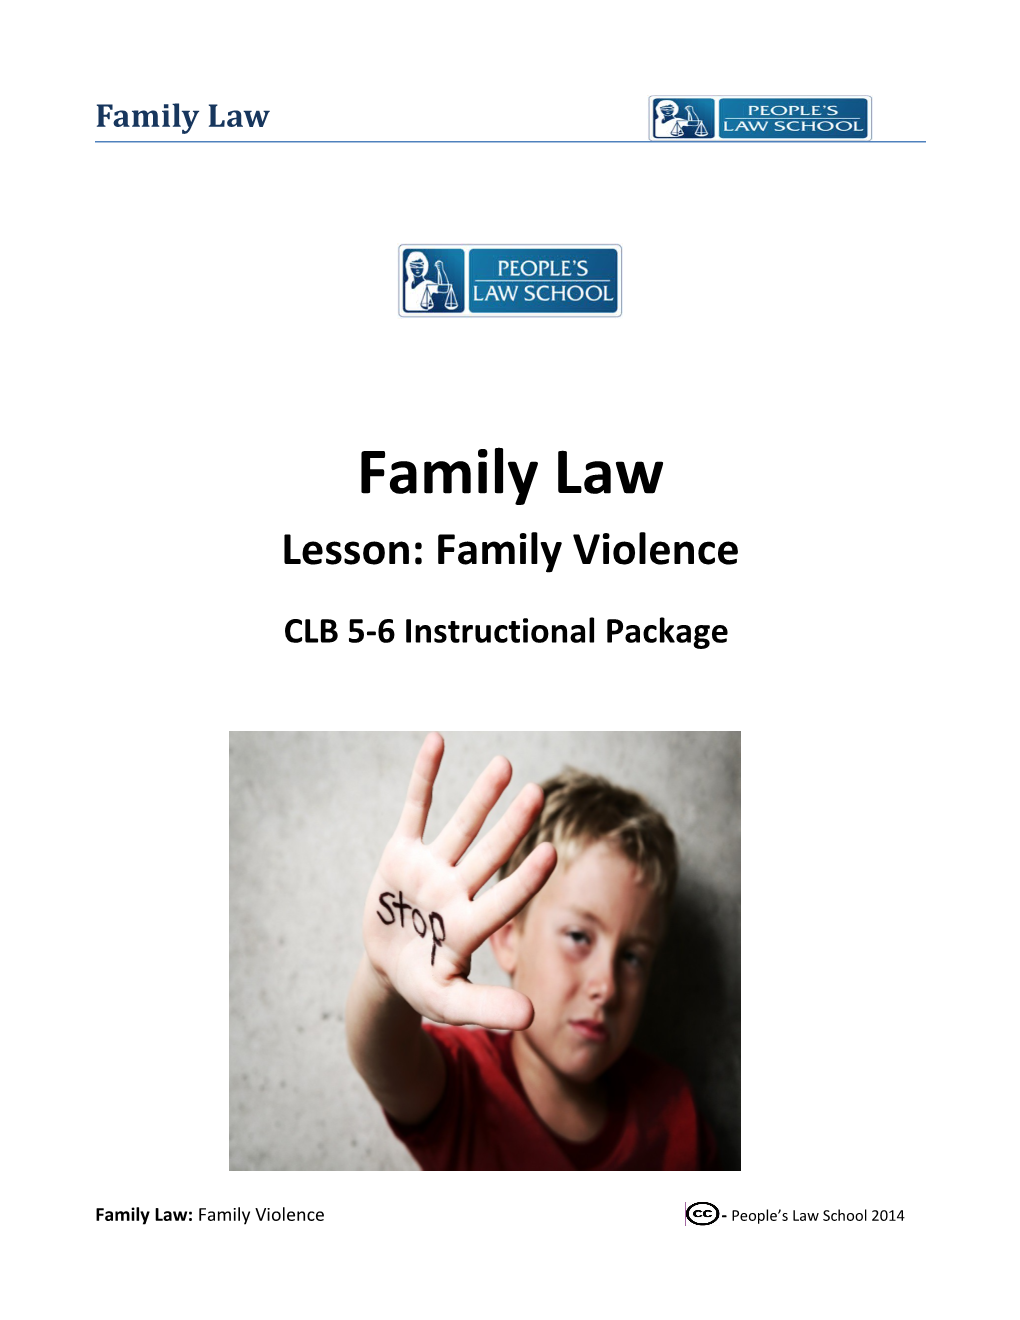 Family Law: Family Violence(CLB 5-6)